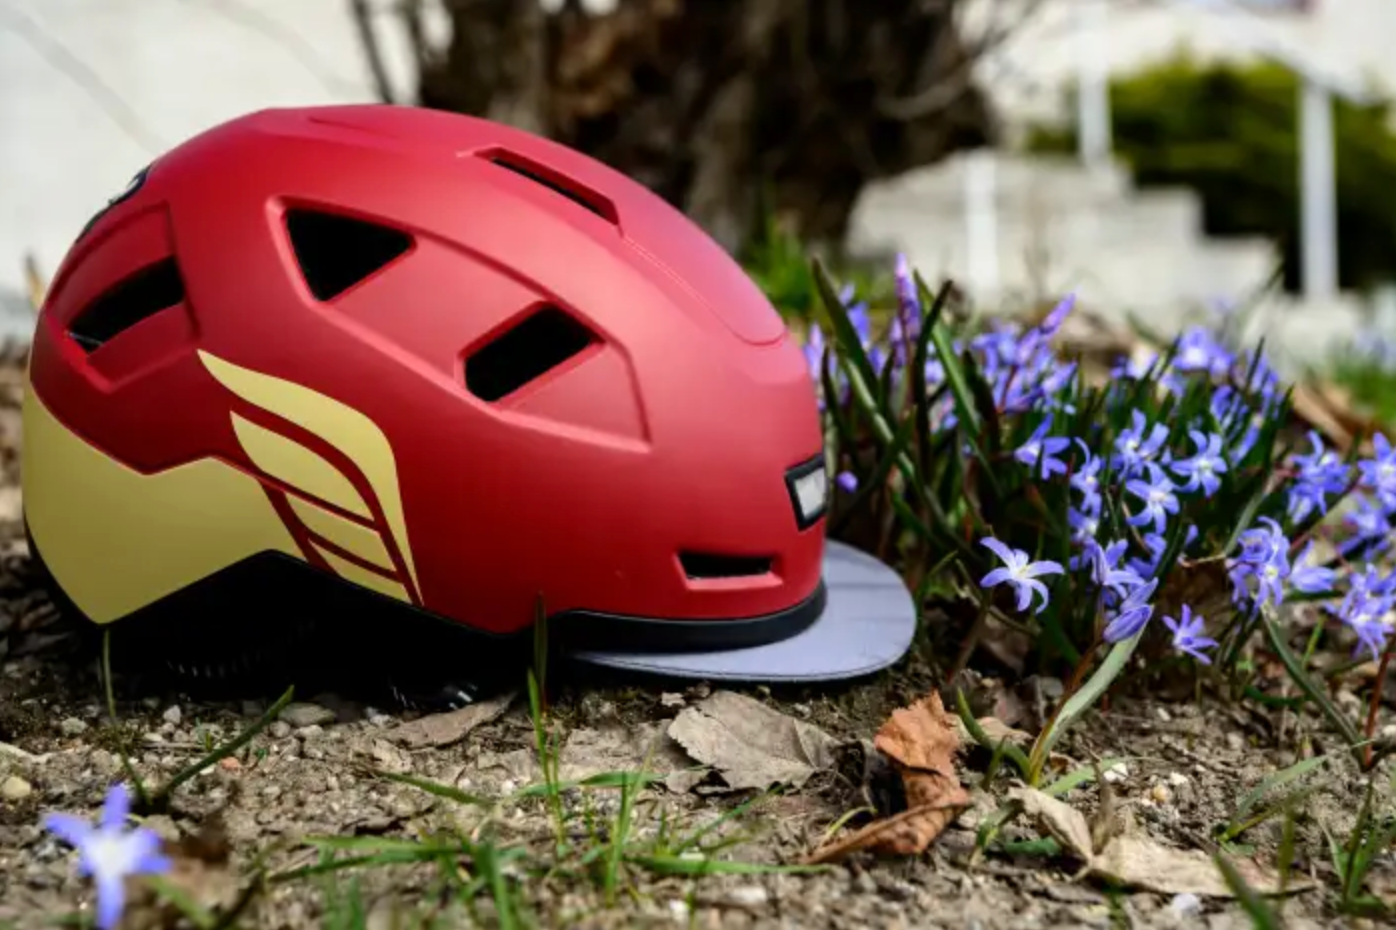 Are Regular Helmets Safe Enough for E-Bikes? One Californian Company Doesn't Think So